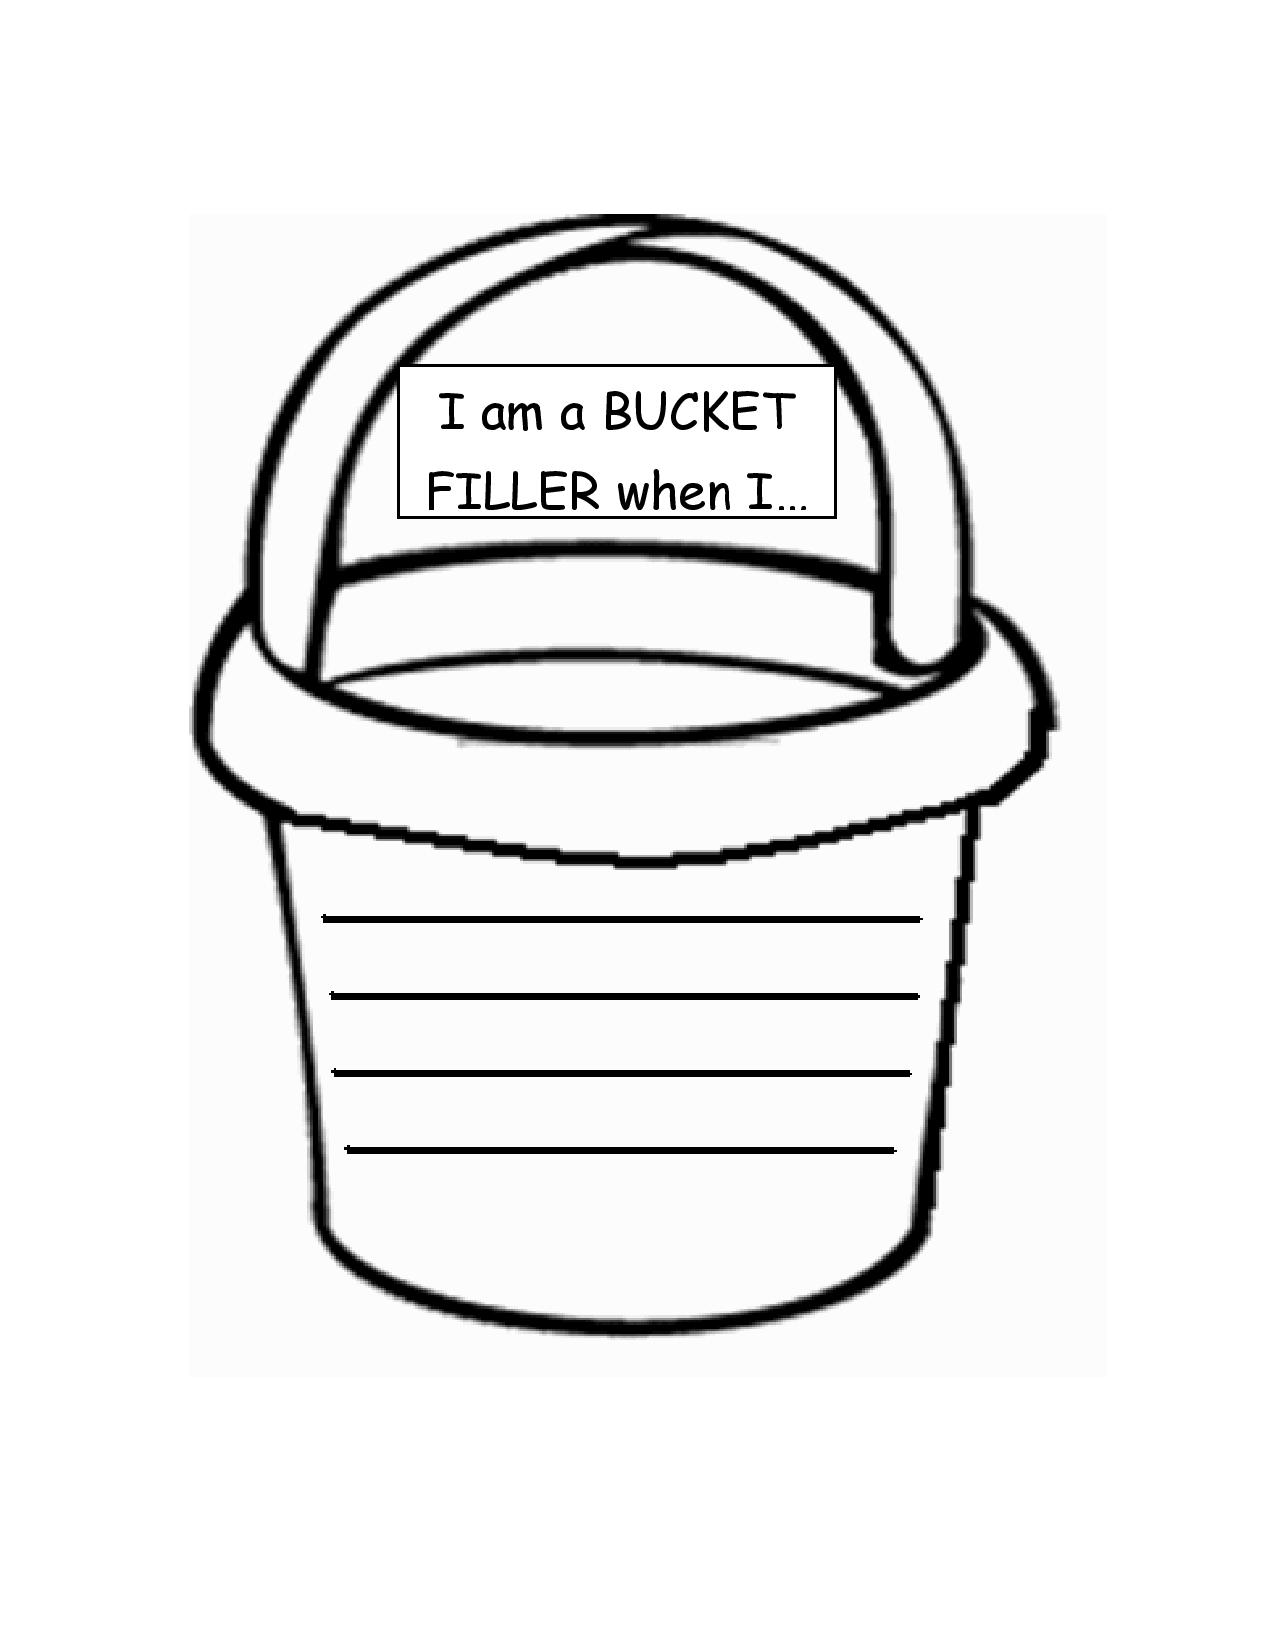 Free Bucket Coloring Page, Download Free Bucket Coloring Page png